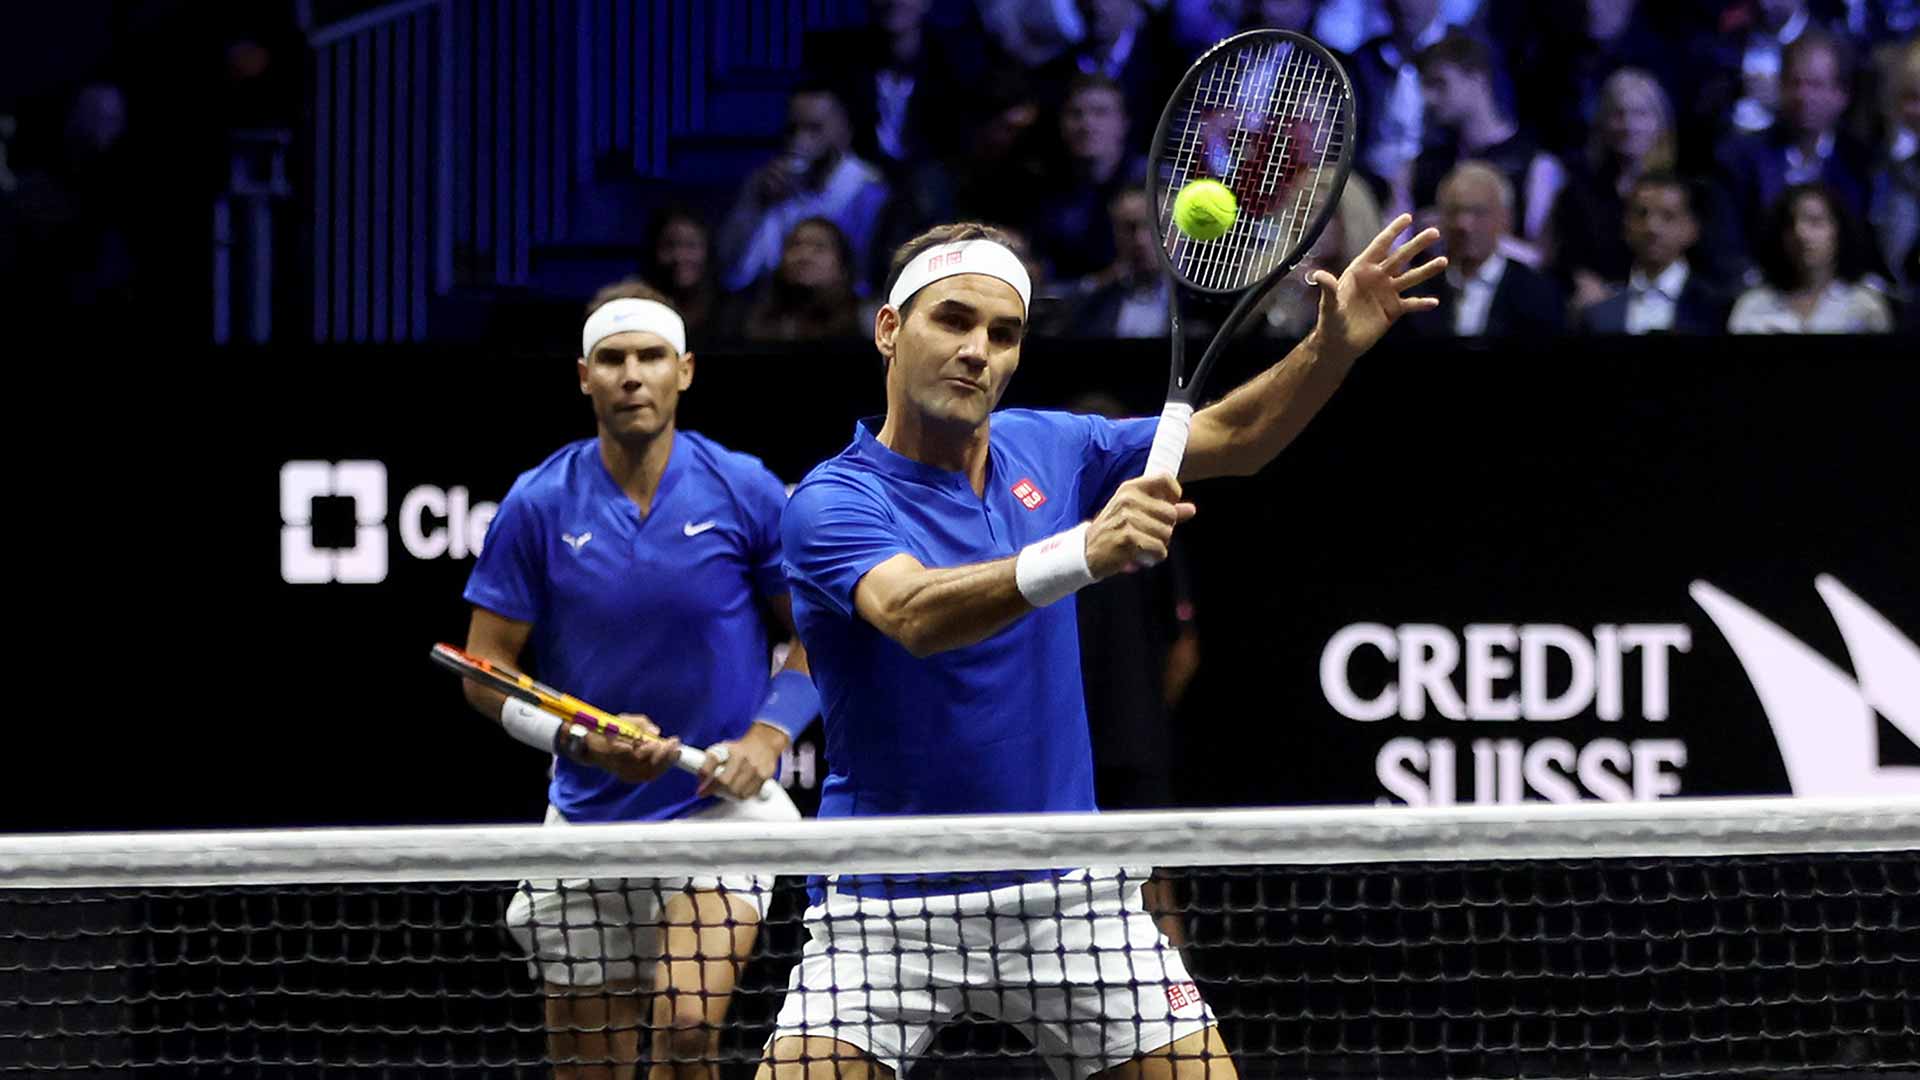 Rafael Nadal and Roger Federer team at the Laver Cup on Friday night in London.